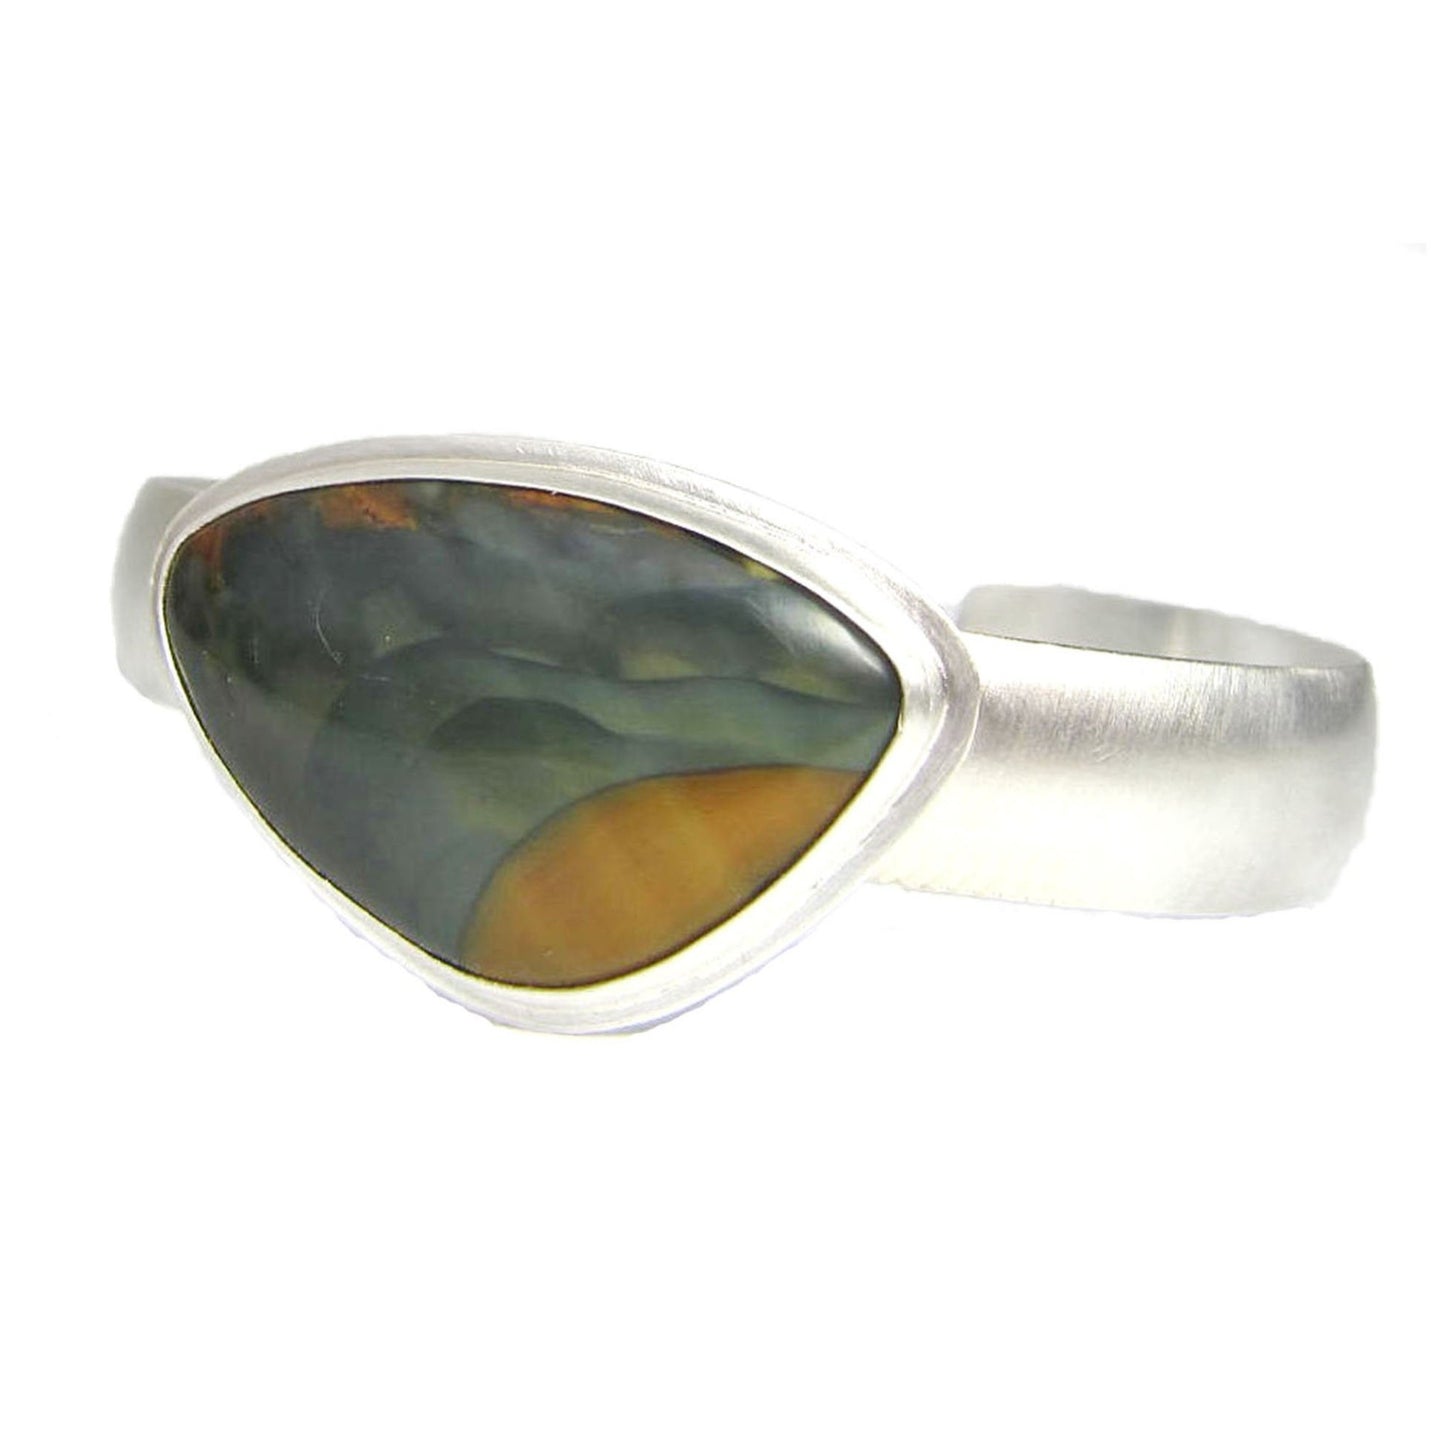 Blue Mountain Oregon Jasper silver cuff bracelet. The stone is blue and golden colors, the cuff is softly domed